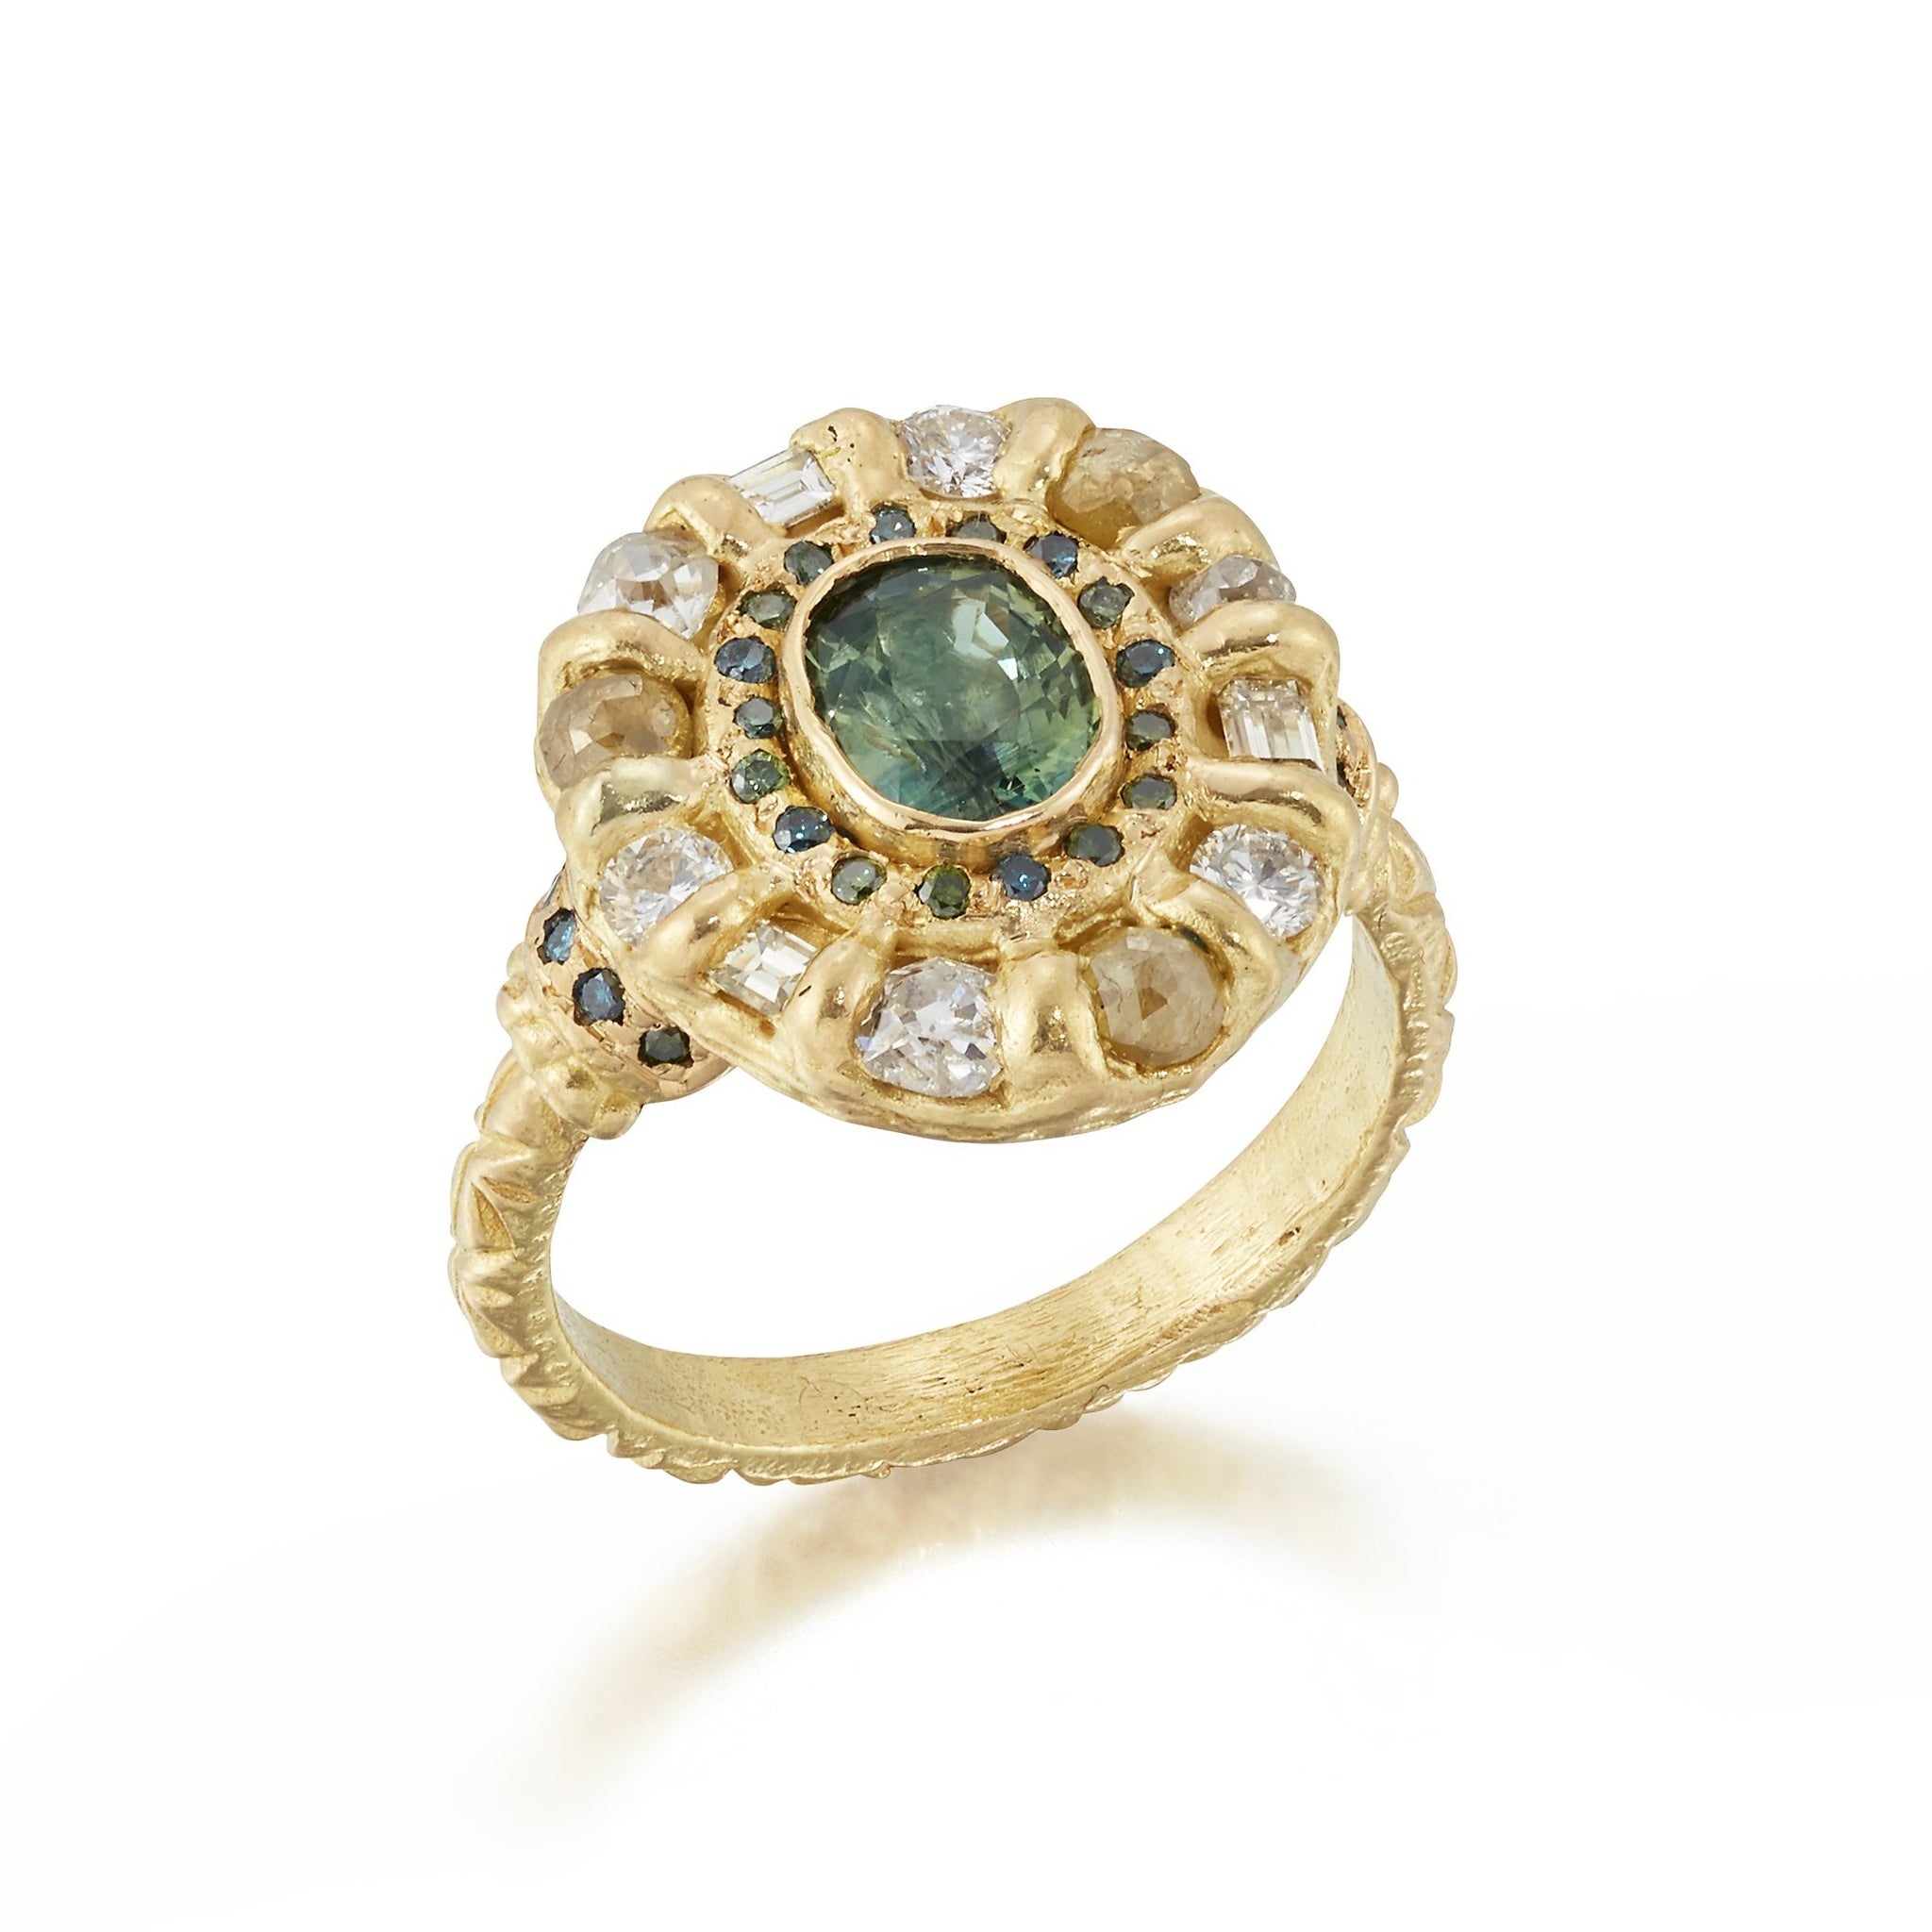 Celeste Treasury 'One of a kind' Double Halo Ring